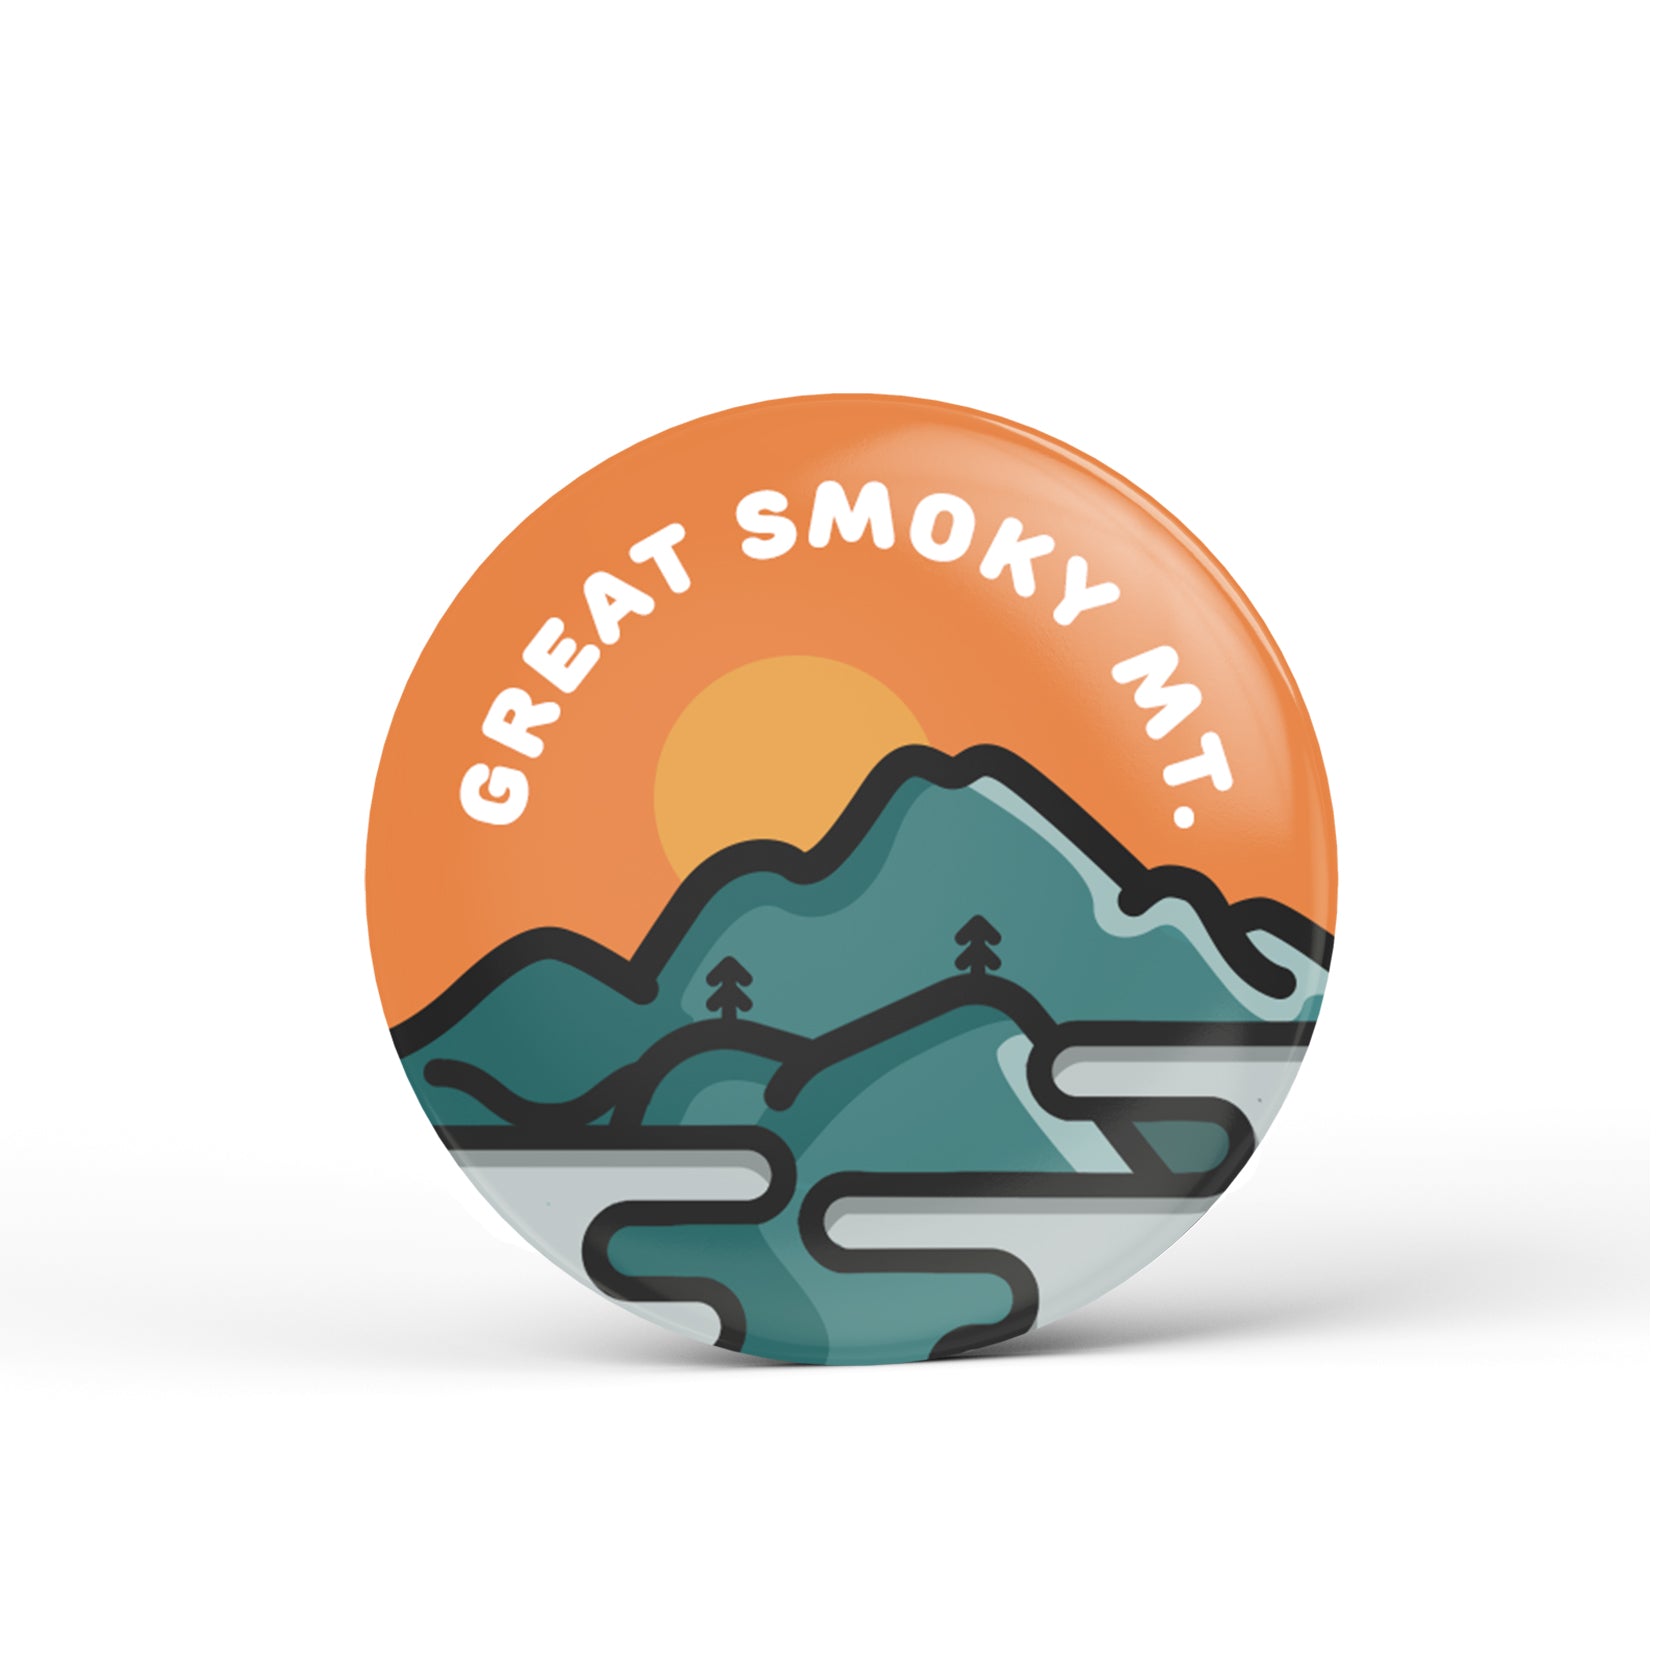 Great Smoky Mt. National Park Button